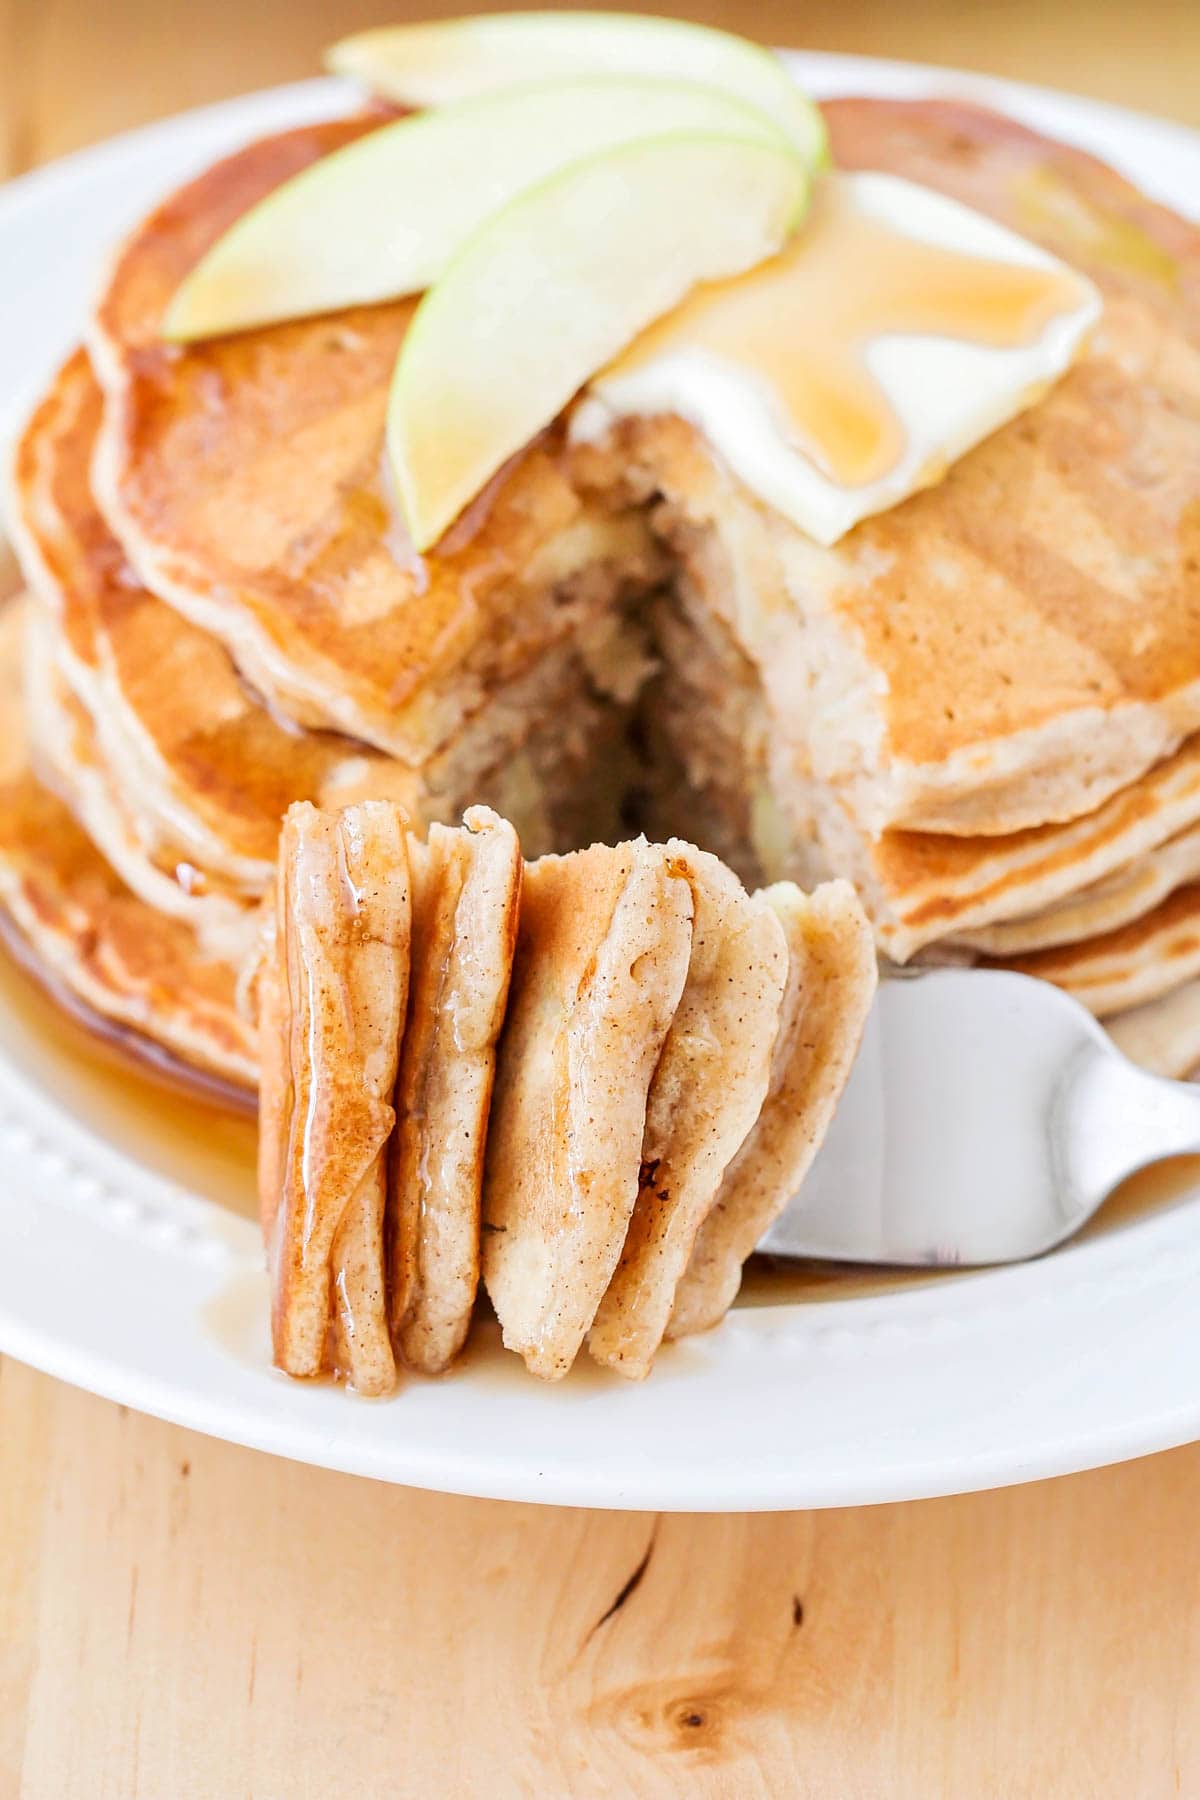 Apple pancakes topped with butter and syrup